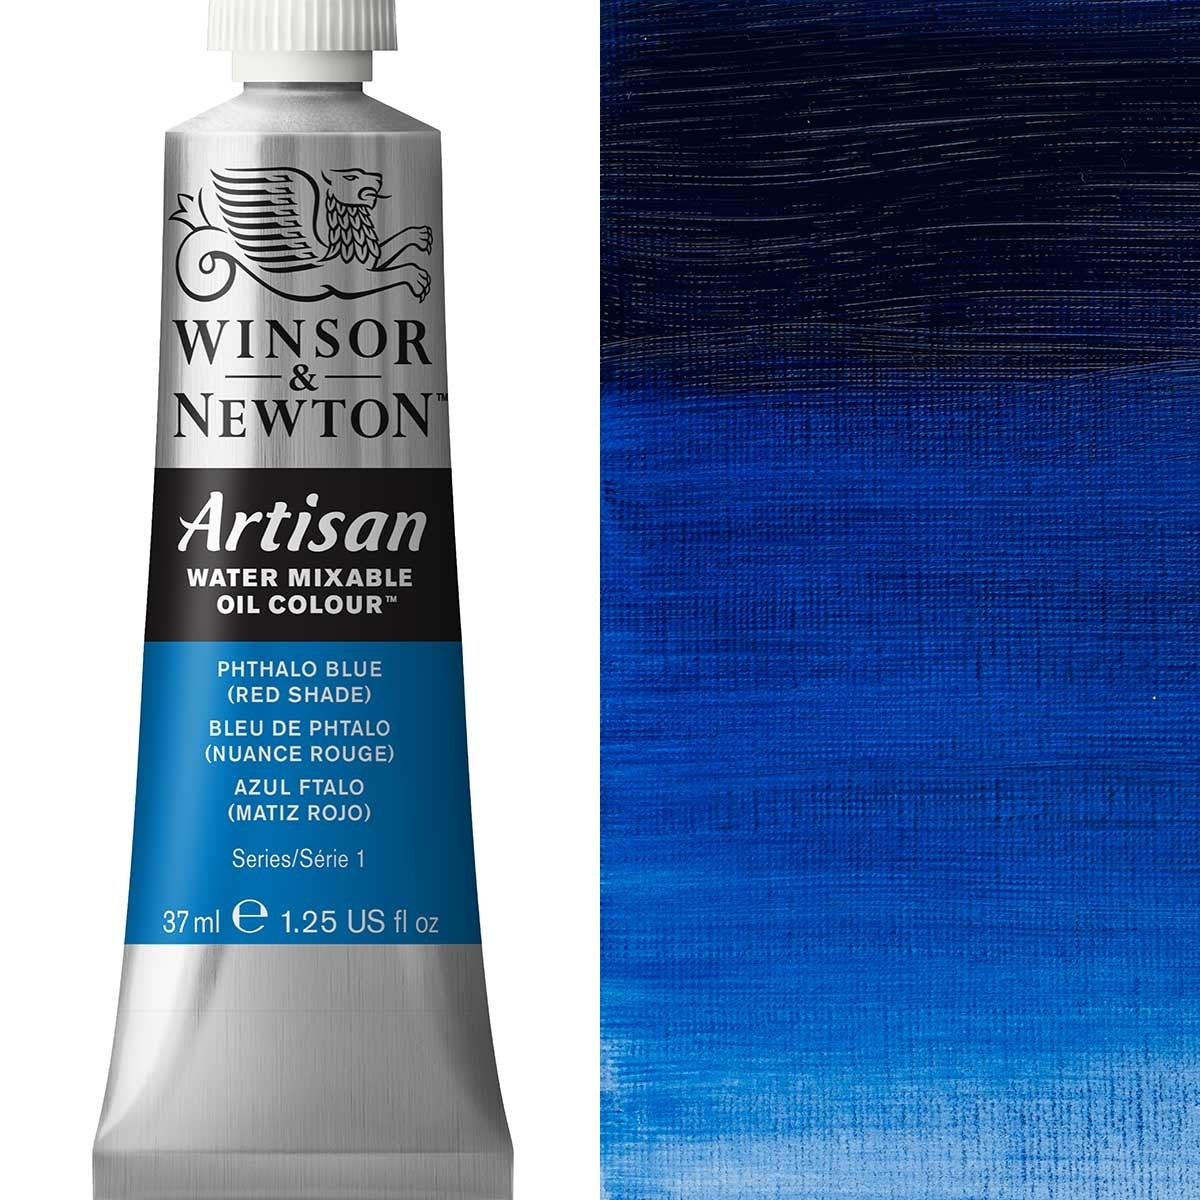 Winsor and Newton - Artisan Oil Colour Watermixable - 37ml - Phthalo Blue Red Shade